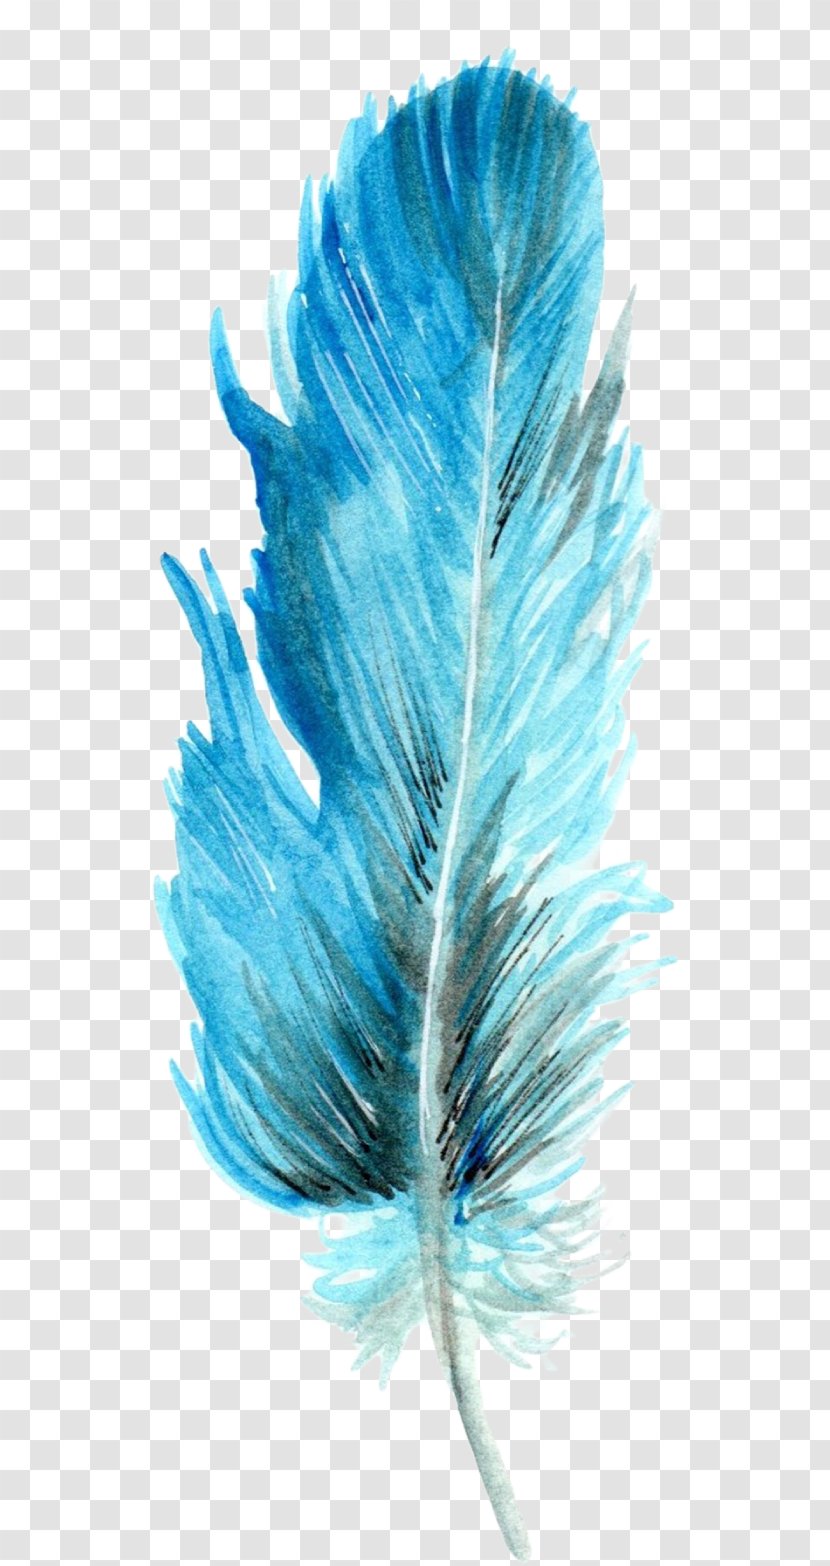 Feather - Turquoise - Feathers Watercolor Transparent PNG